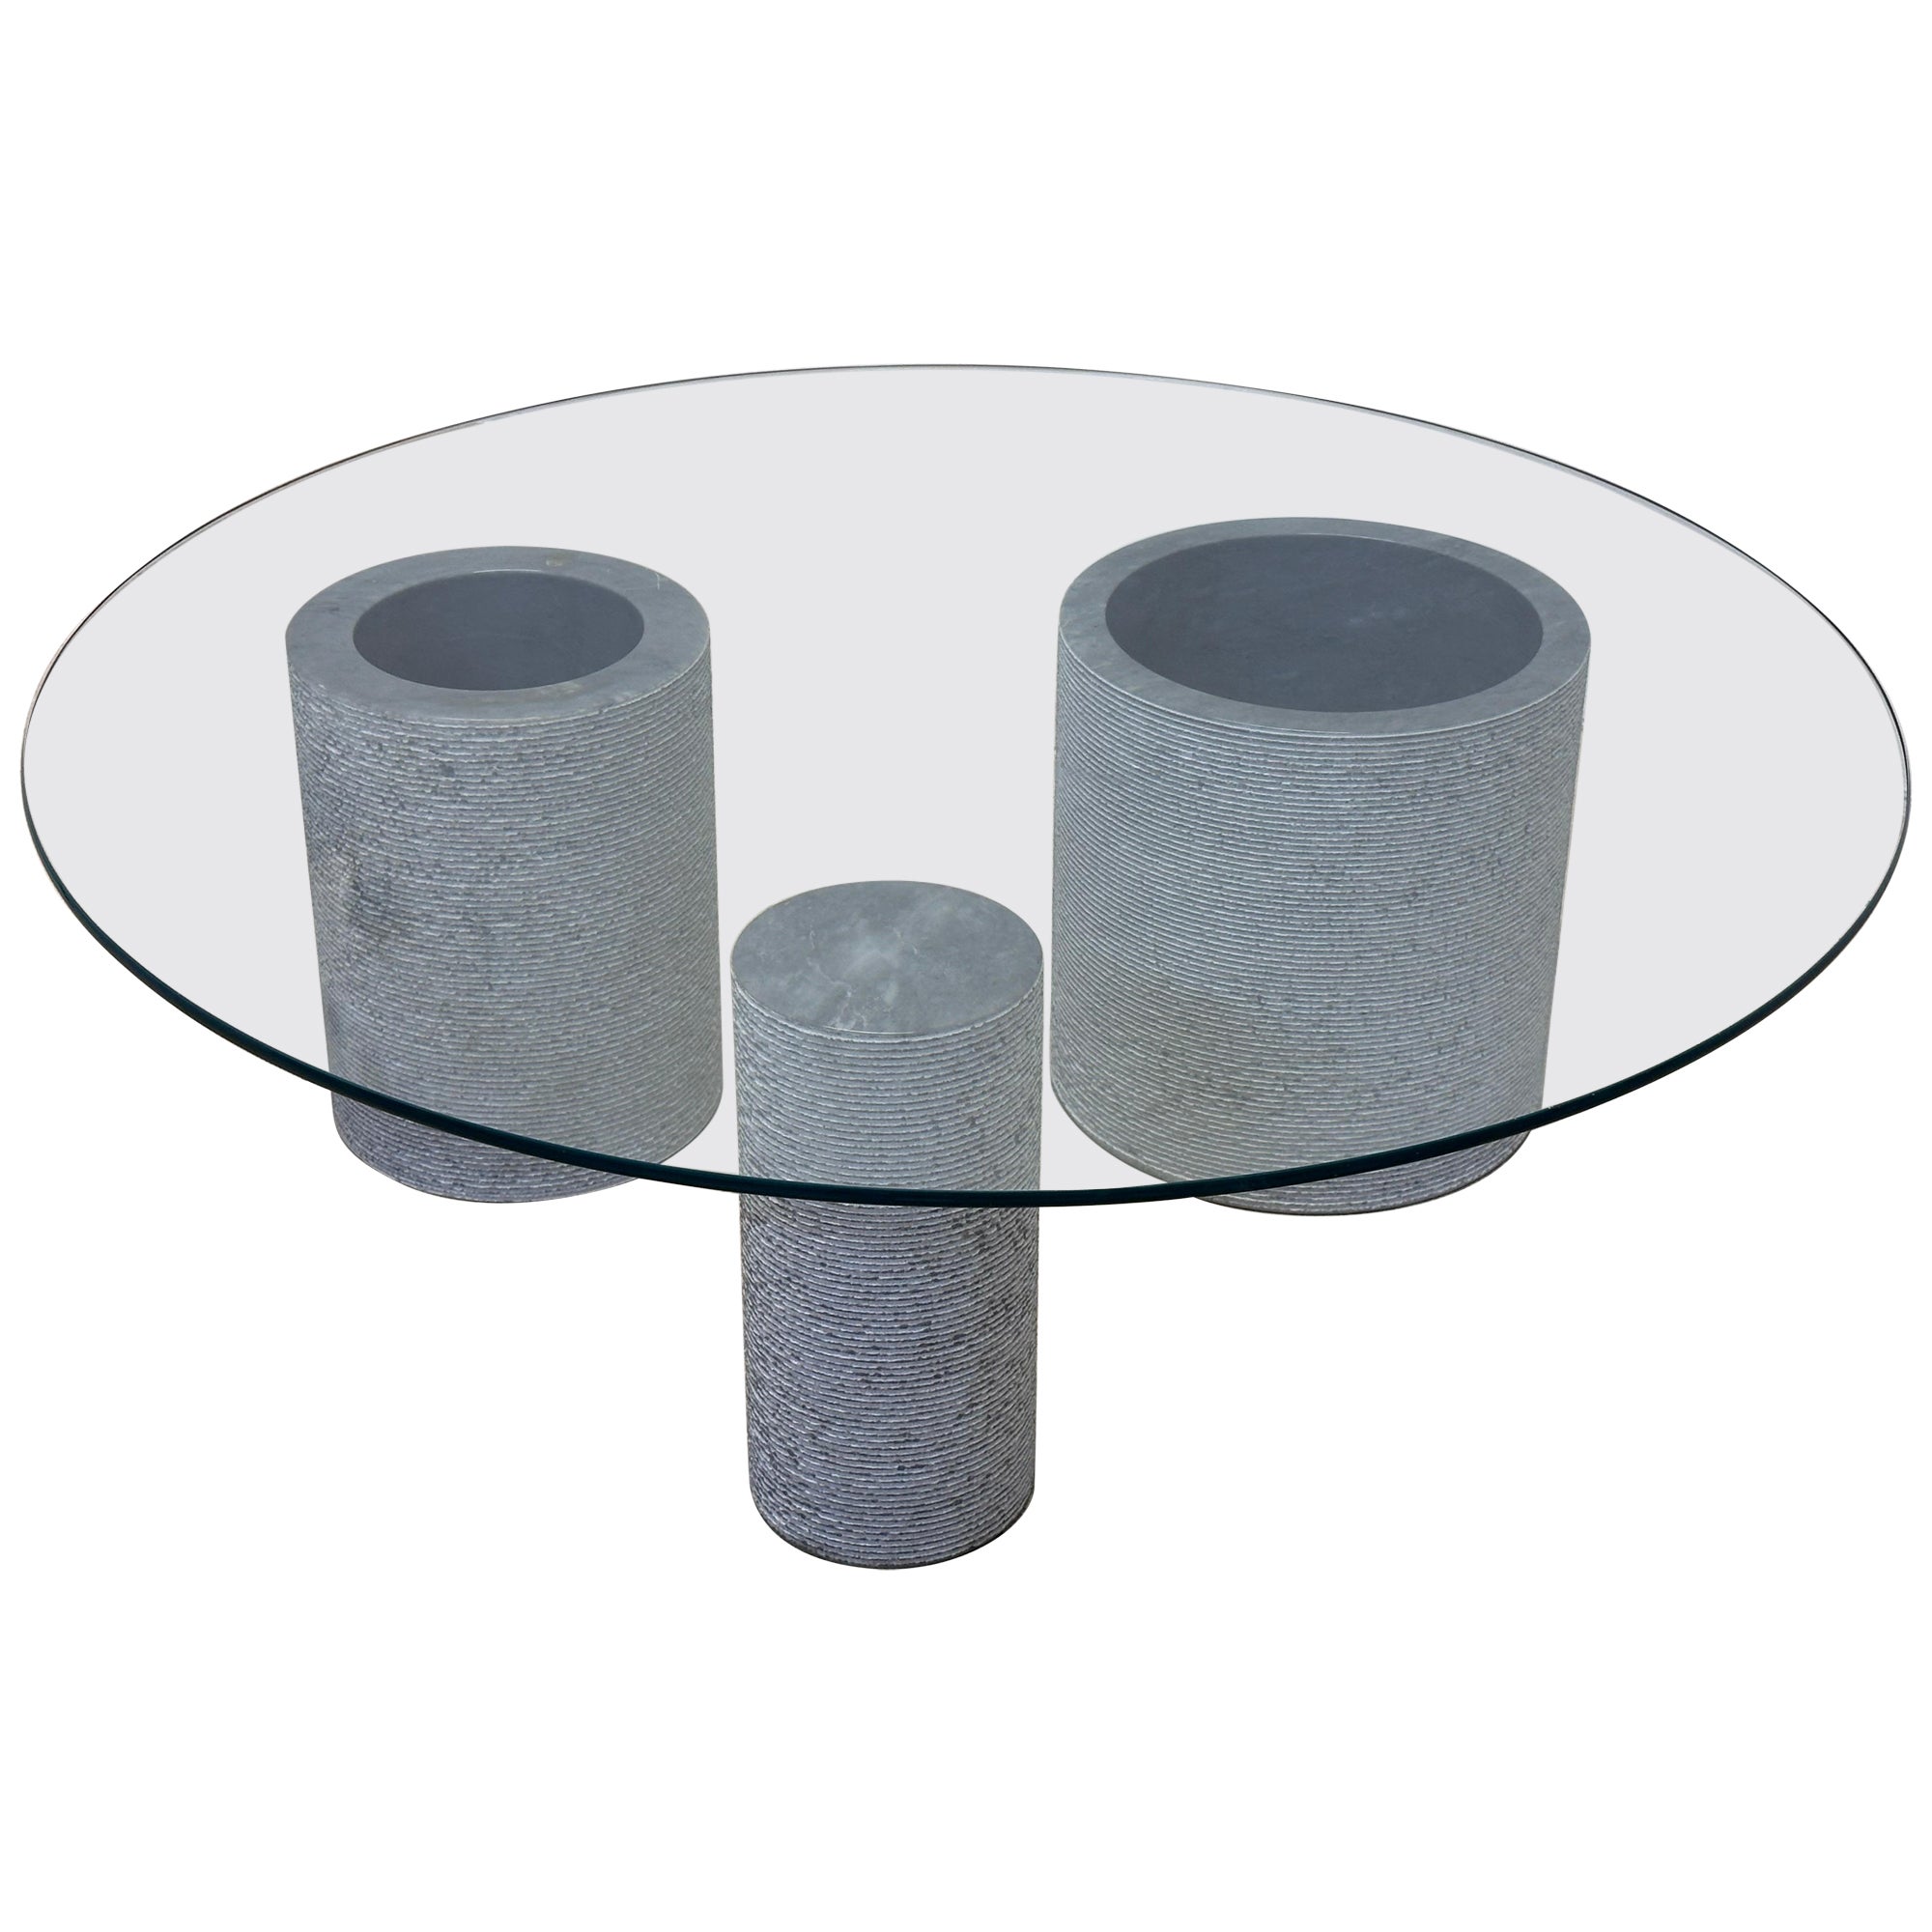 Giulio Lazzotti “Of One, Three Designs” Marble Coffee Table For Casigliani Italy For Sale